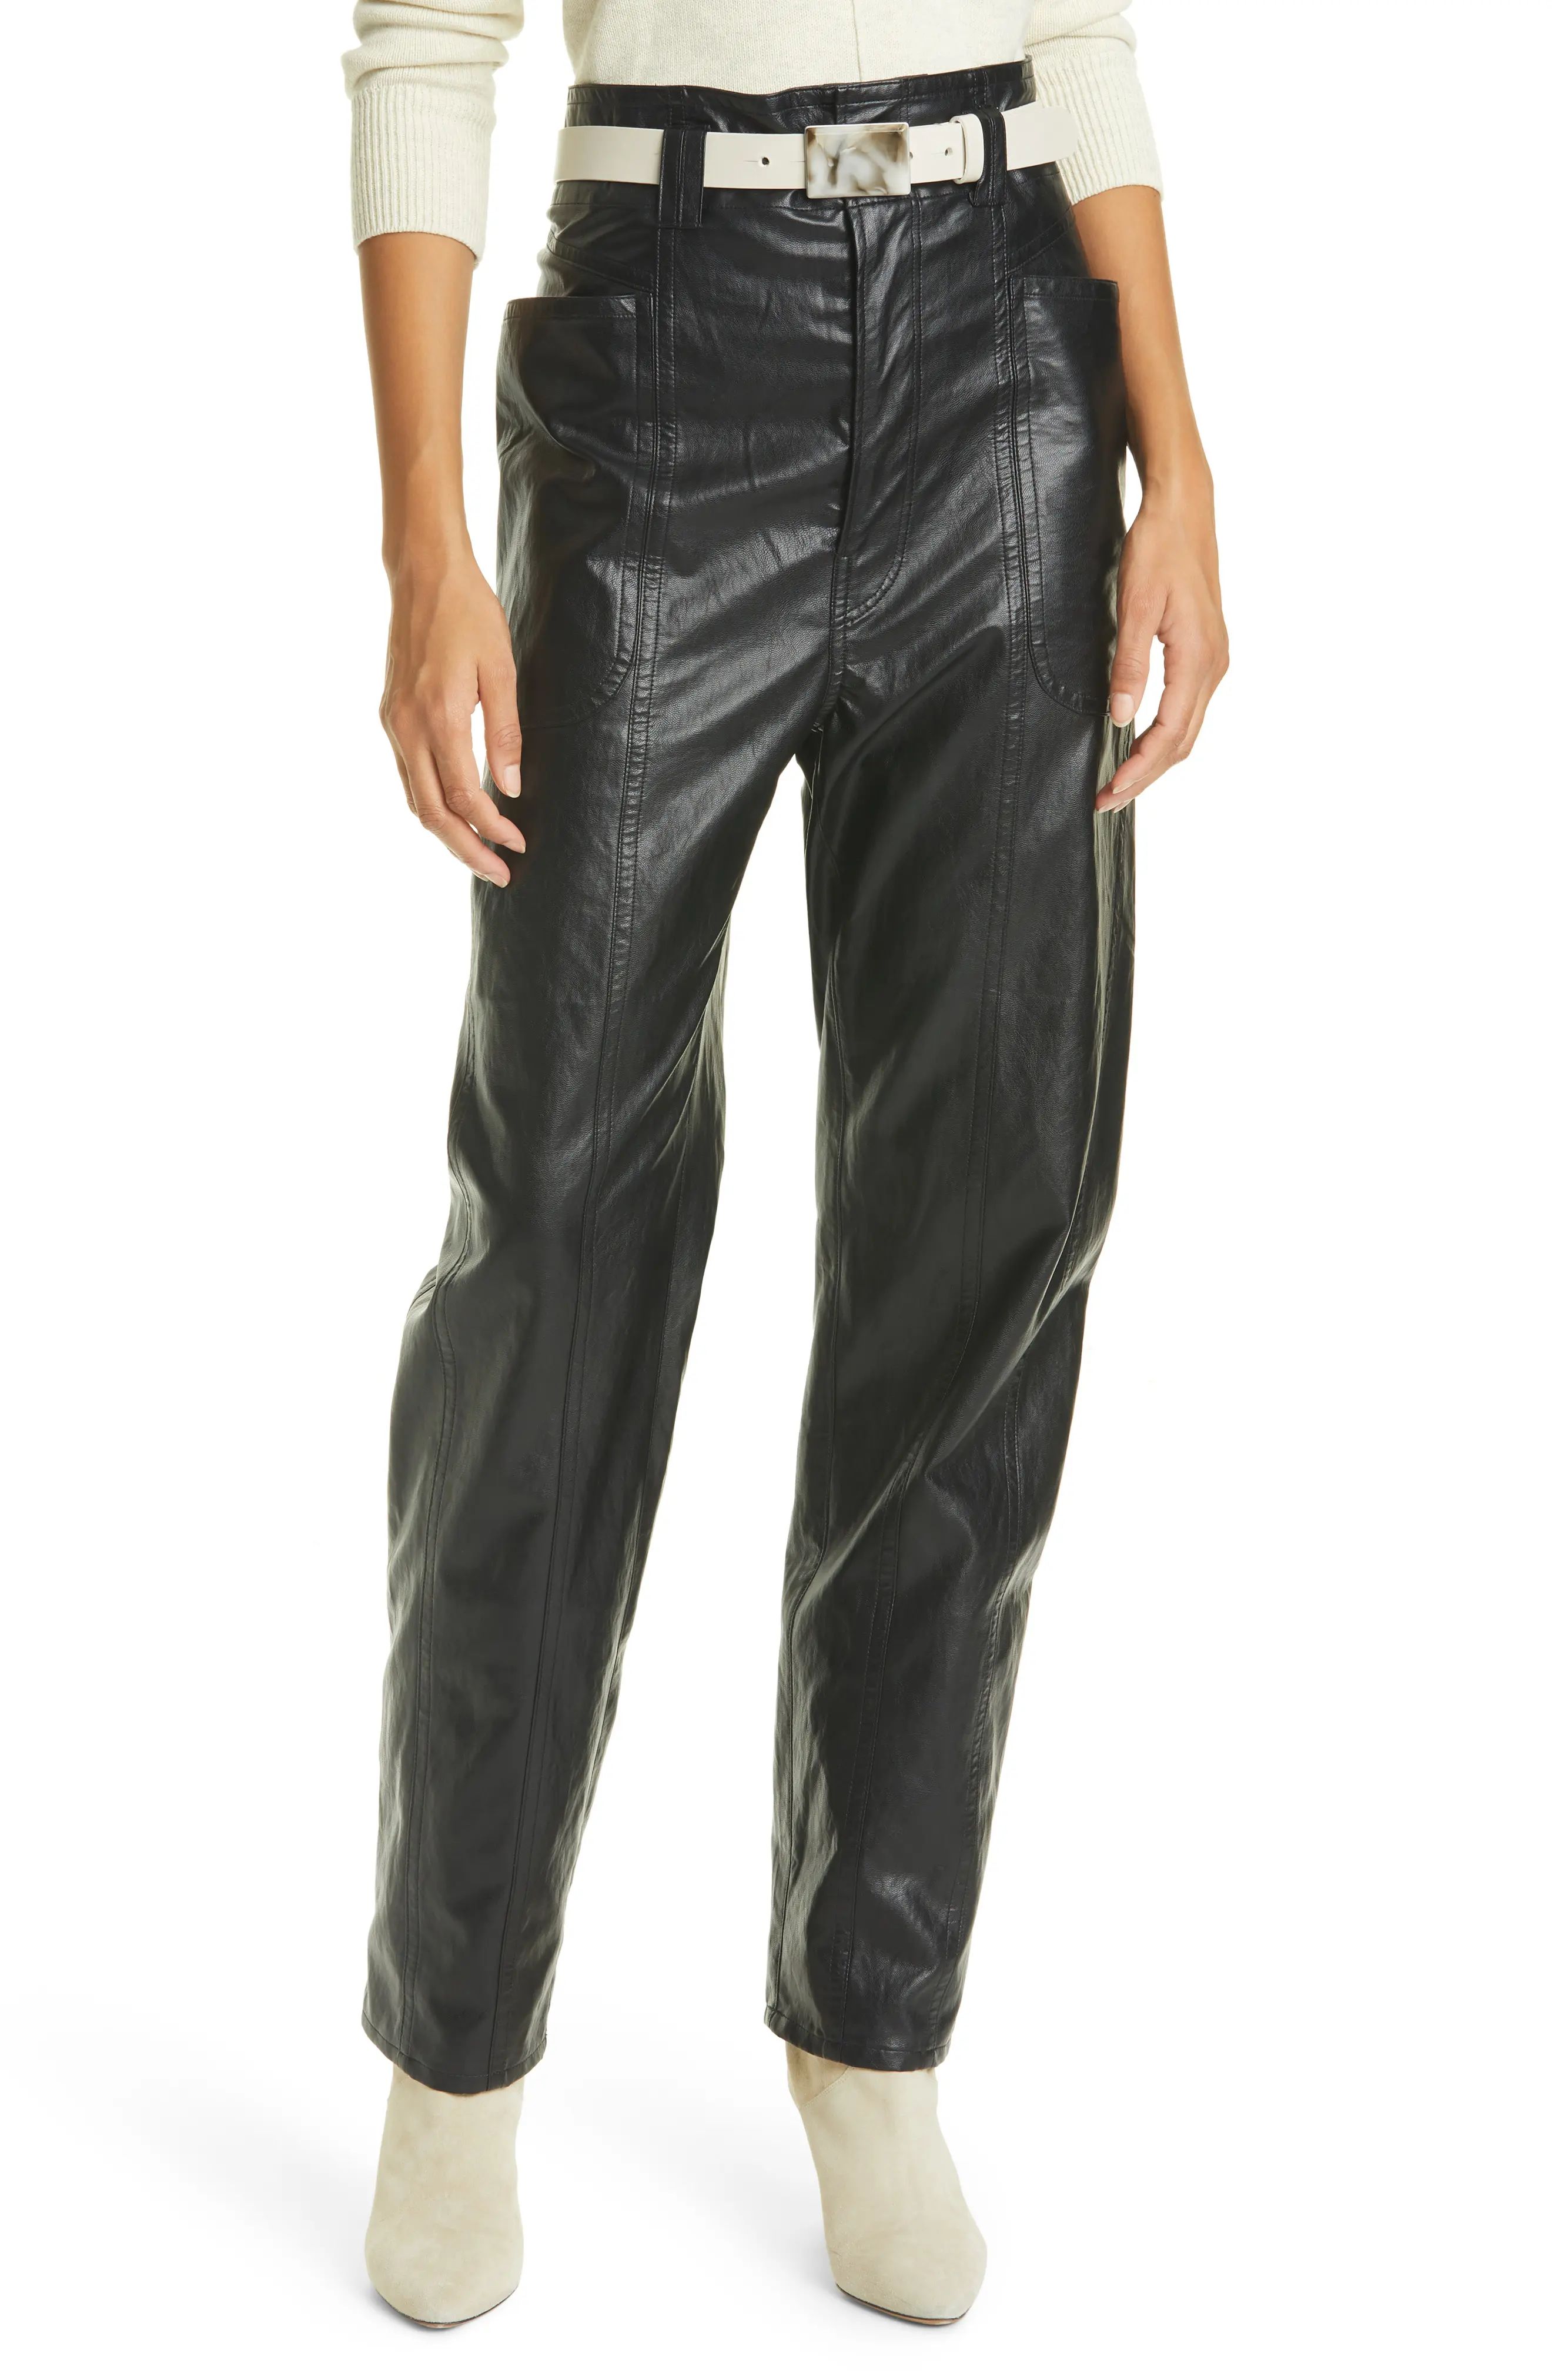 Isabel Marant Etoile Faux Leather Pants, Size 10 Us in Black at Nordstrom | Nordstrom